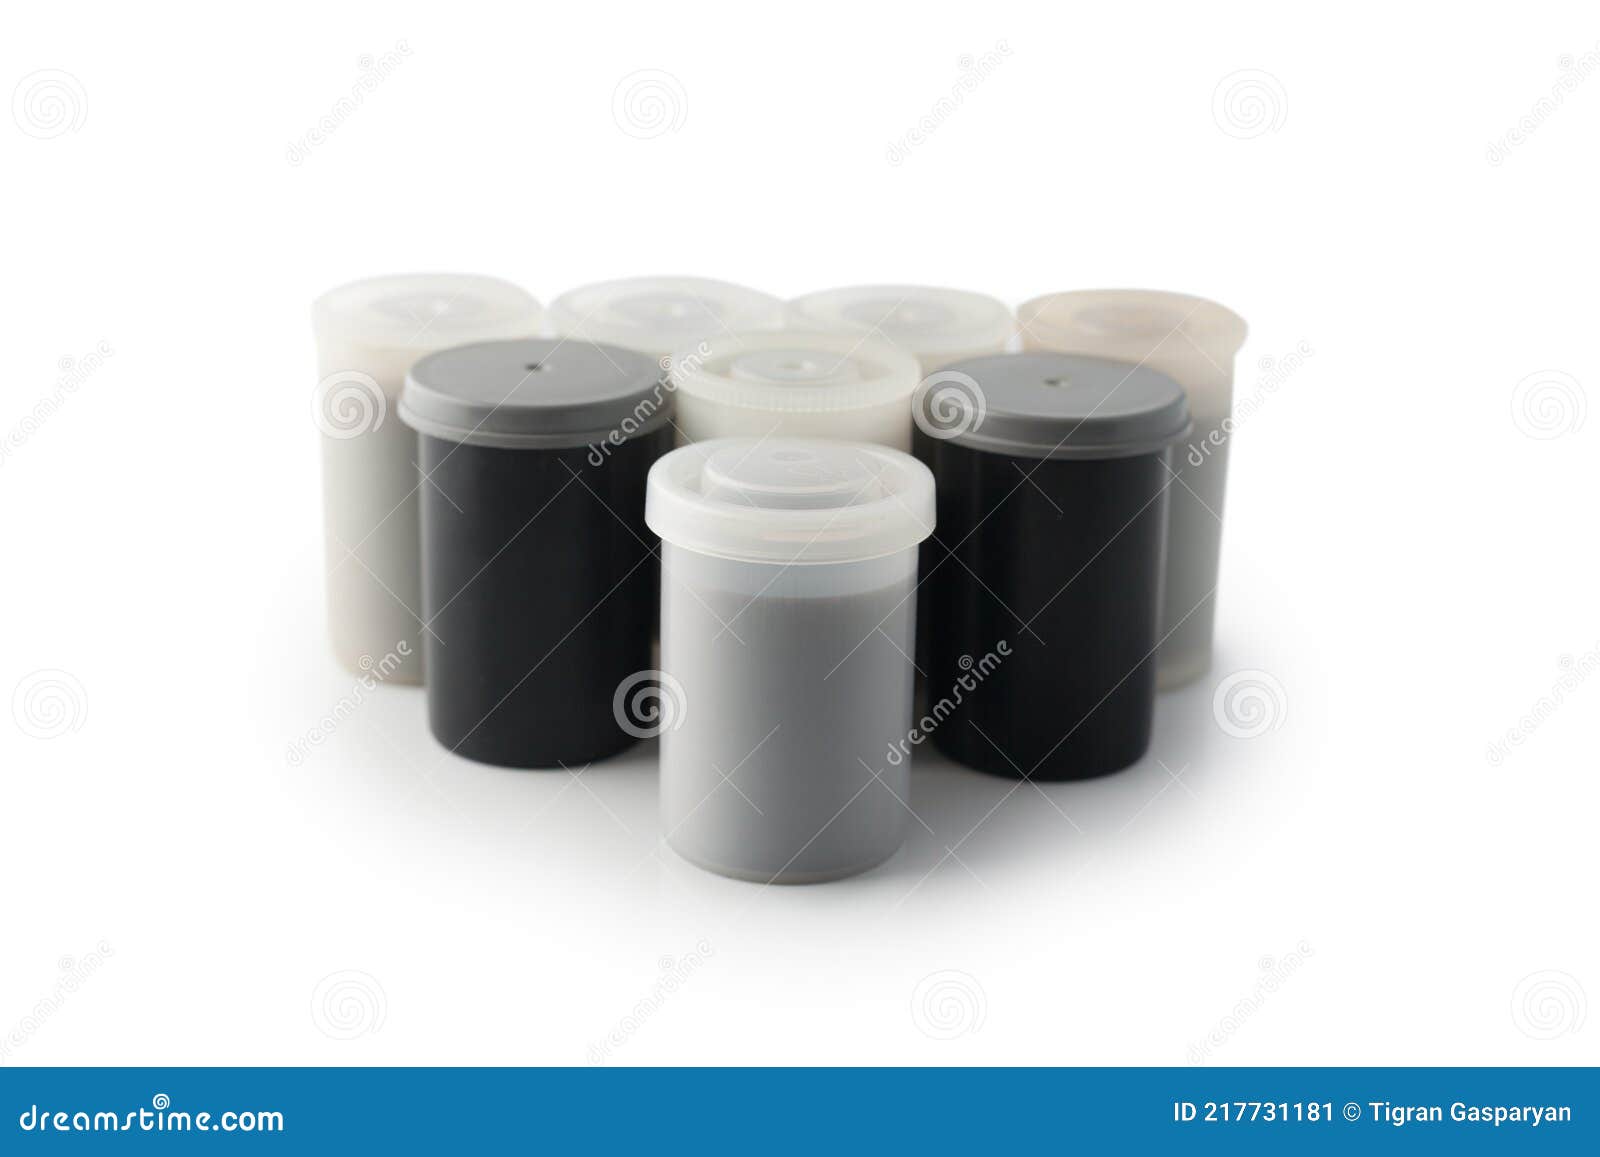 Plastic canister for a film 35mm roll isolated on white background